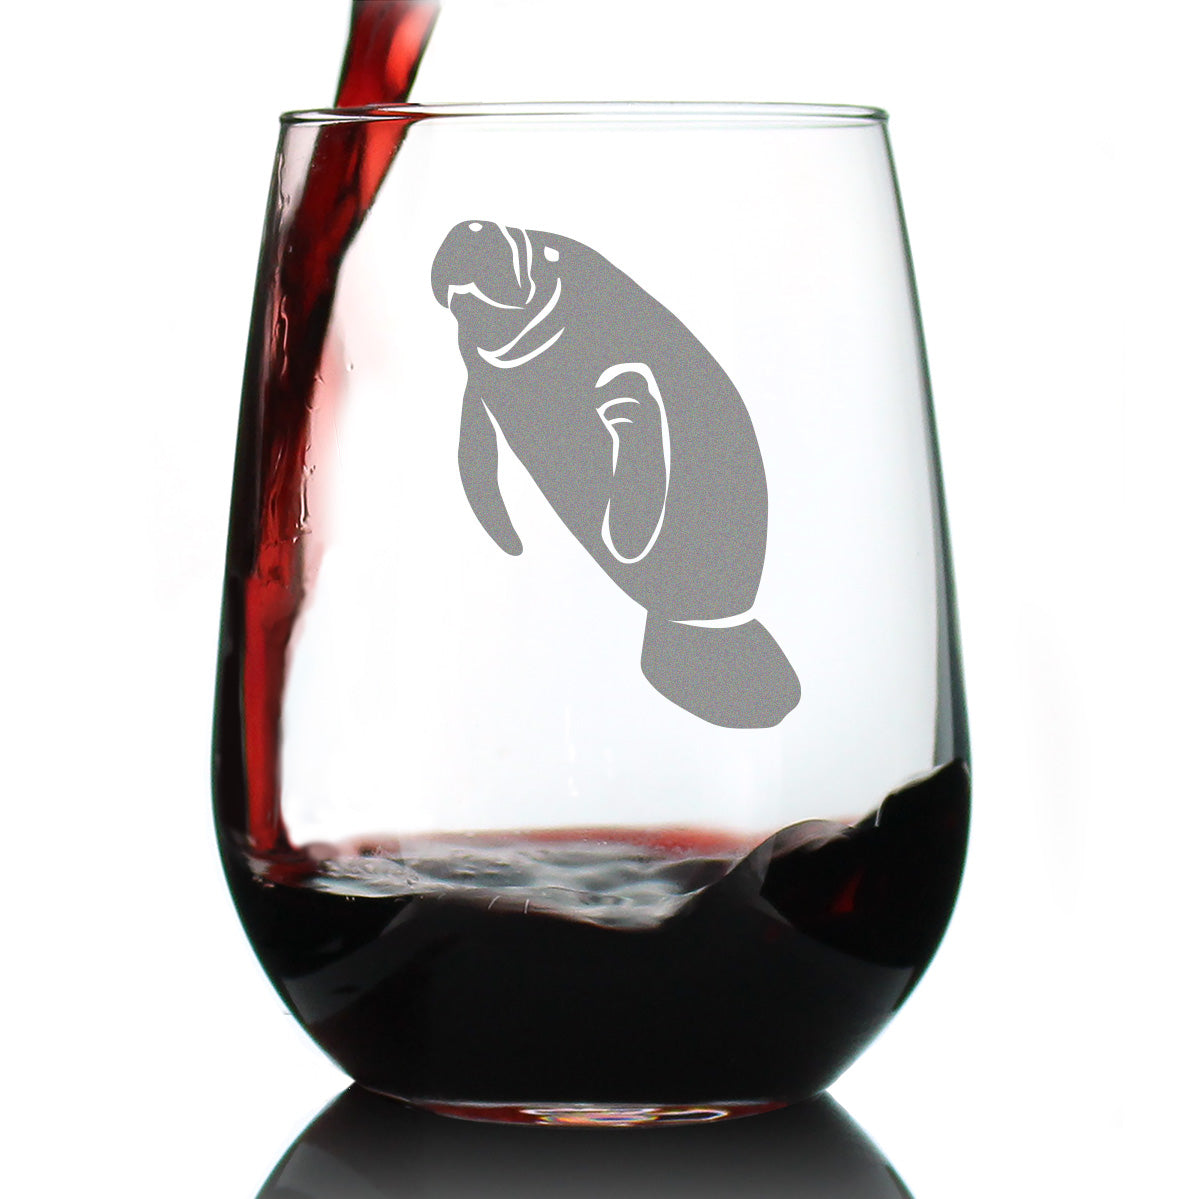 Manatee Stemless Wine Glass - Cute Funny Ocean Animals Themed Decor and Gifts for Sea Creature Lovers - Large 17 Oz